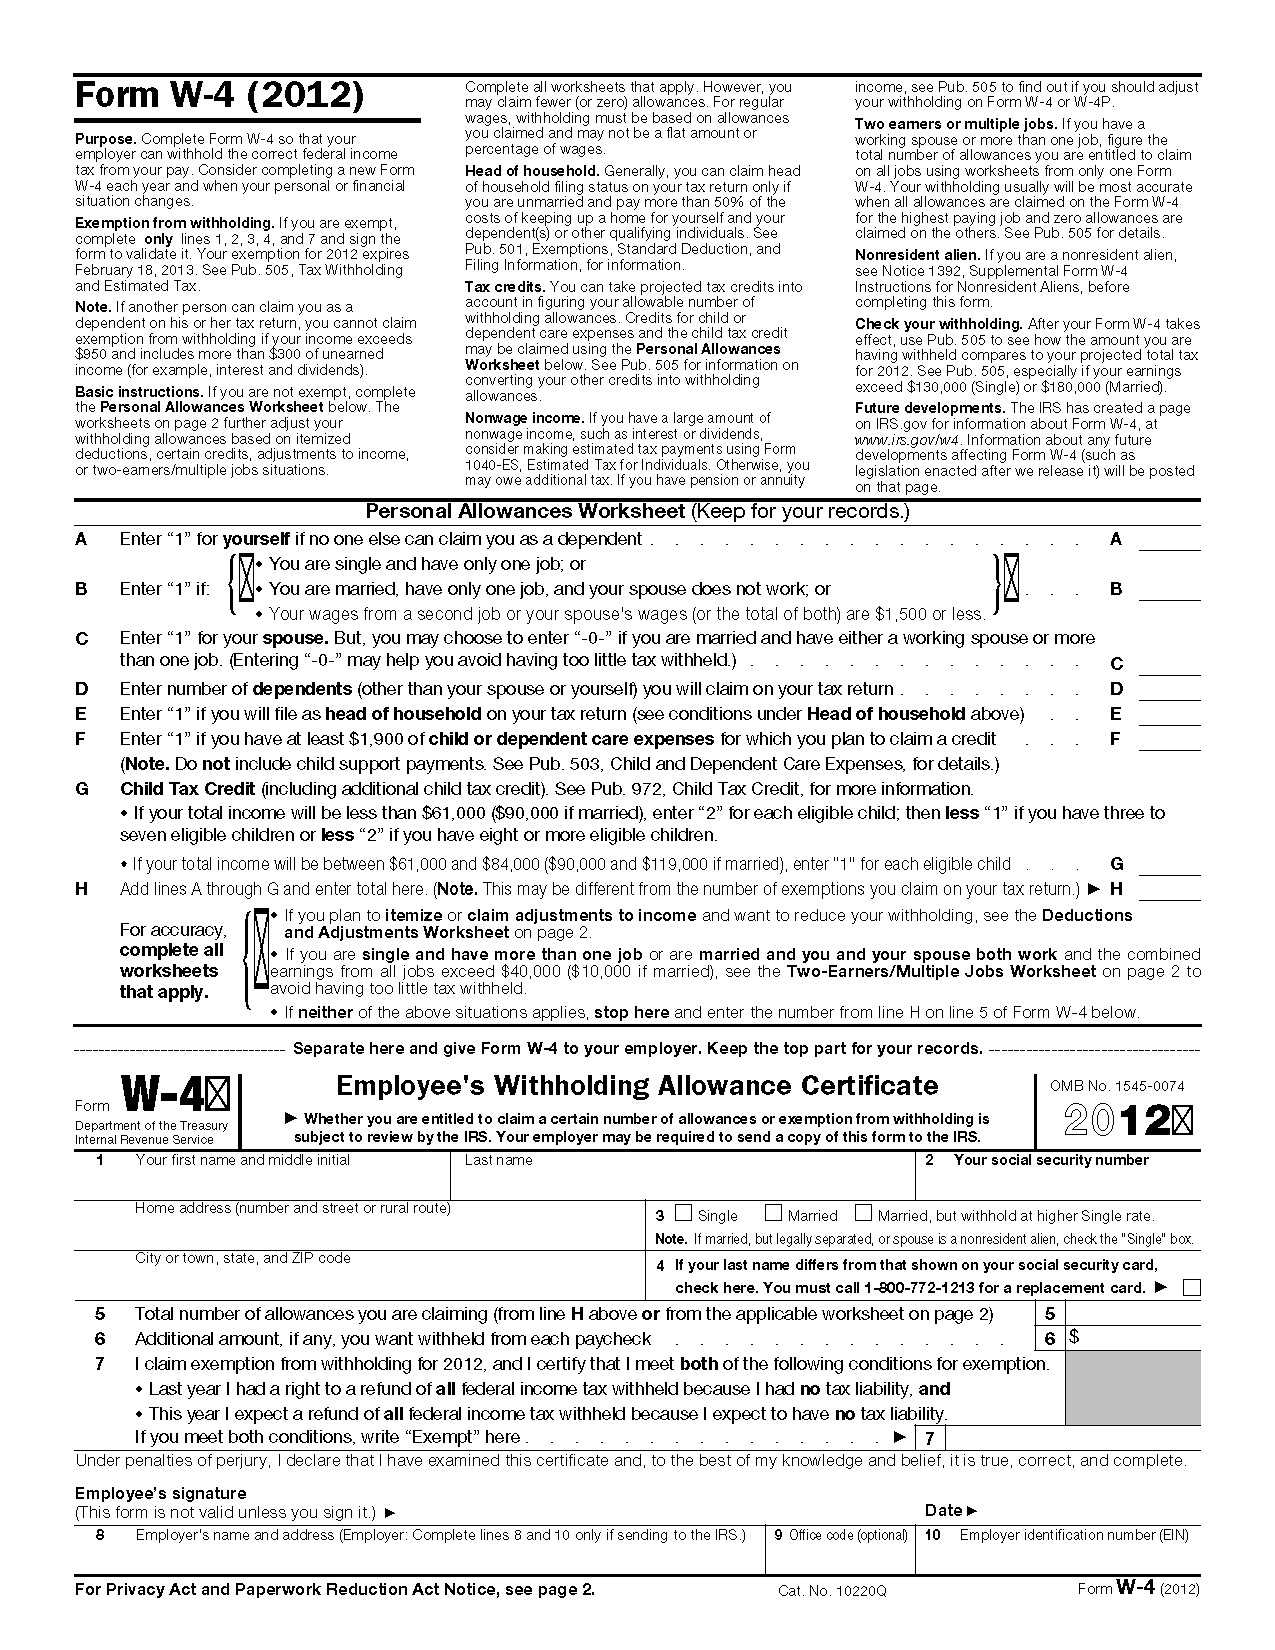 Chapter 7 Federal Income Tax Worksheet Answers Also Taxation Worksheet Answer Key Awesome 36 Best Crash Course U S